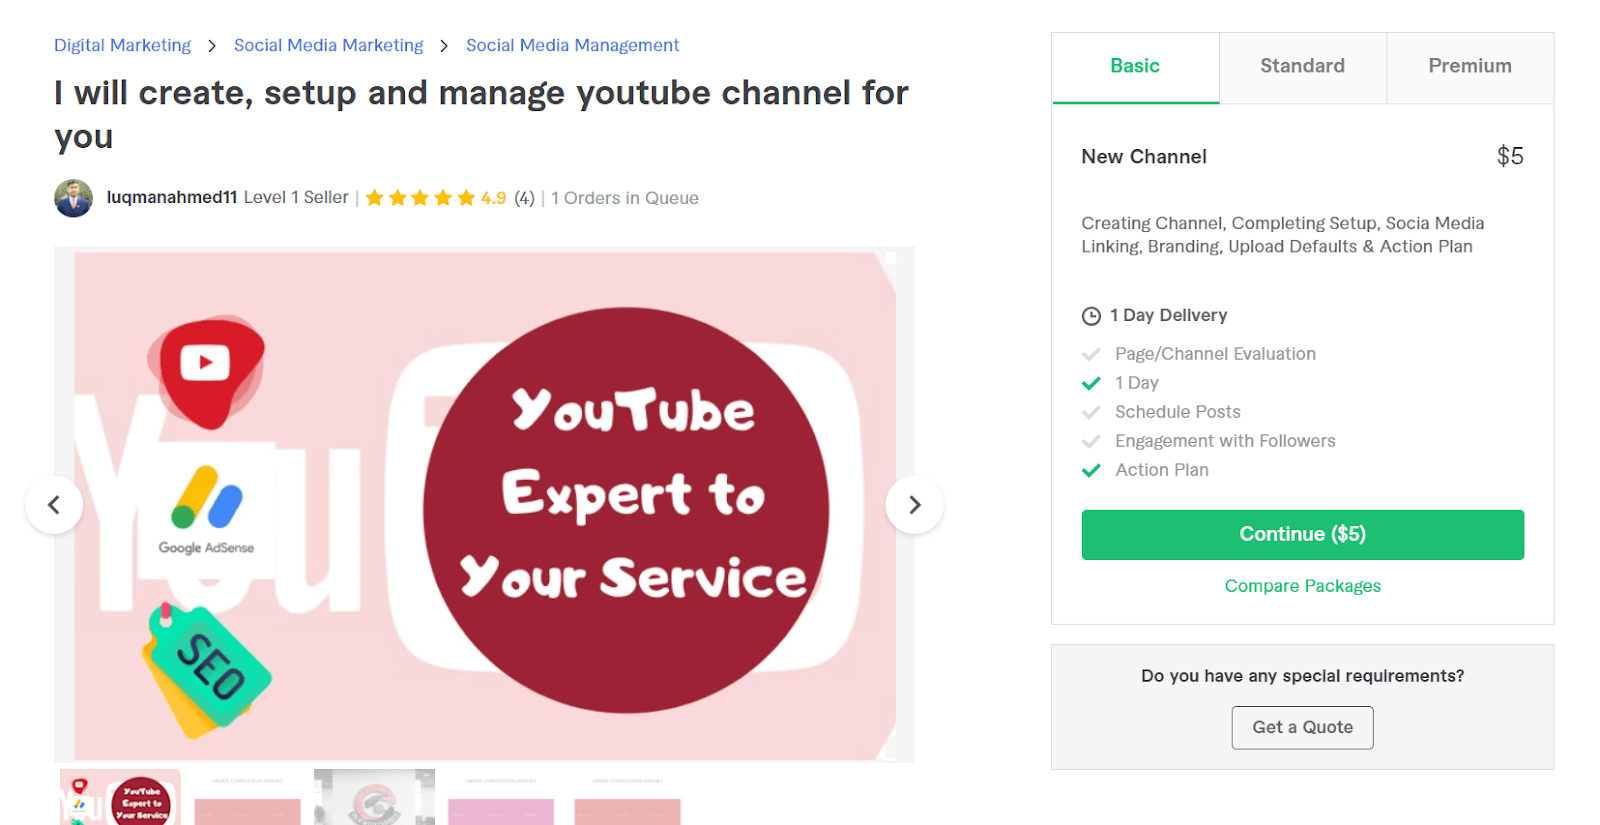 Fiverr screenshot - luqmanahmed11 youtube channel manager gig